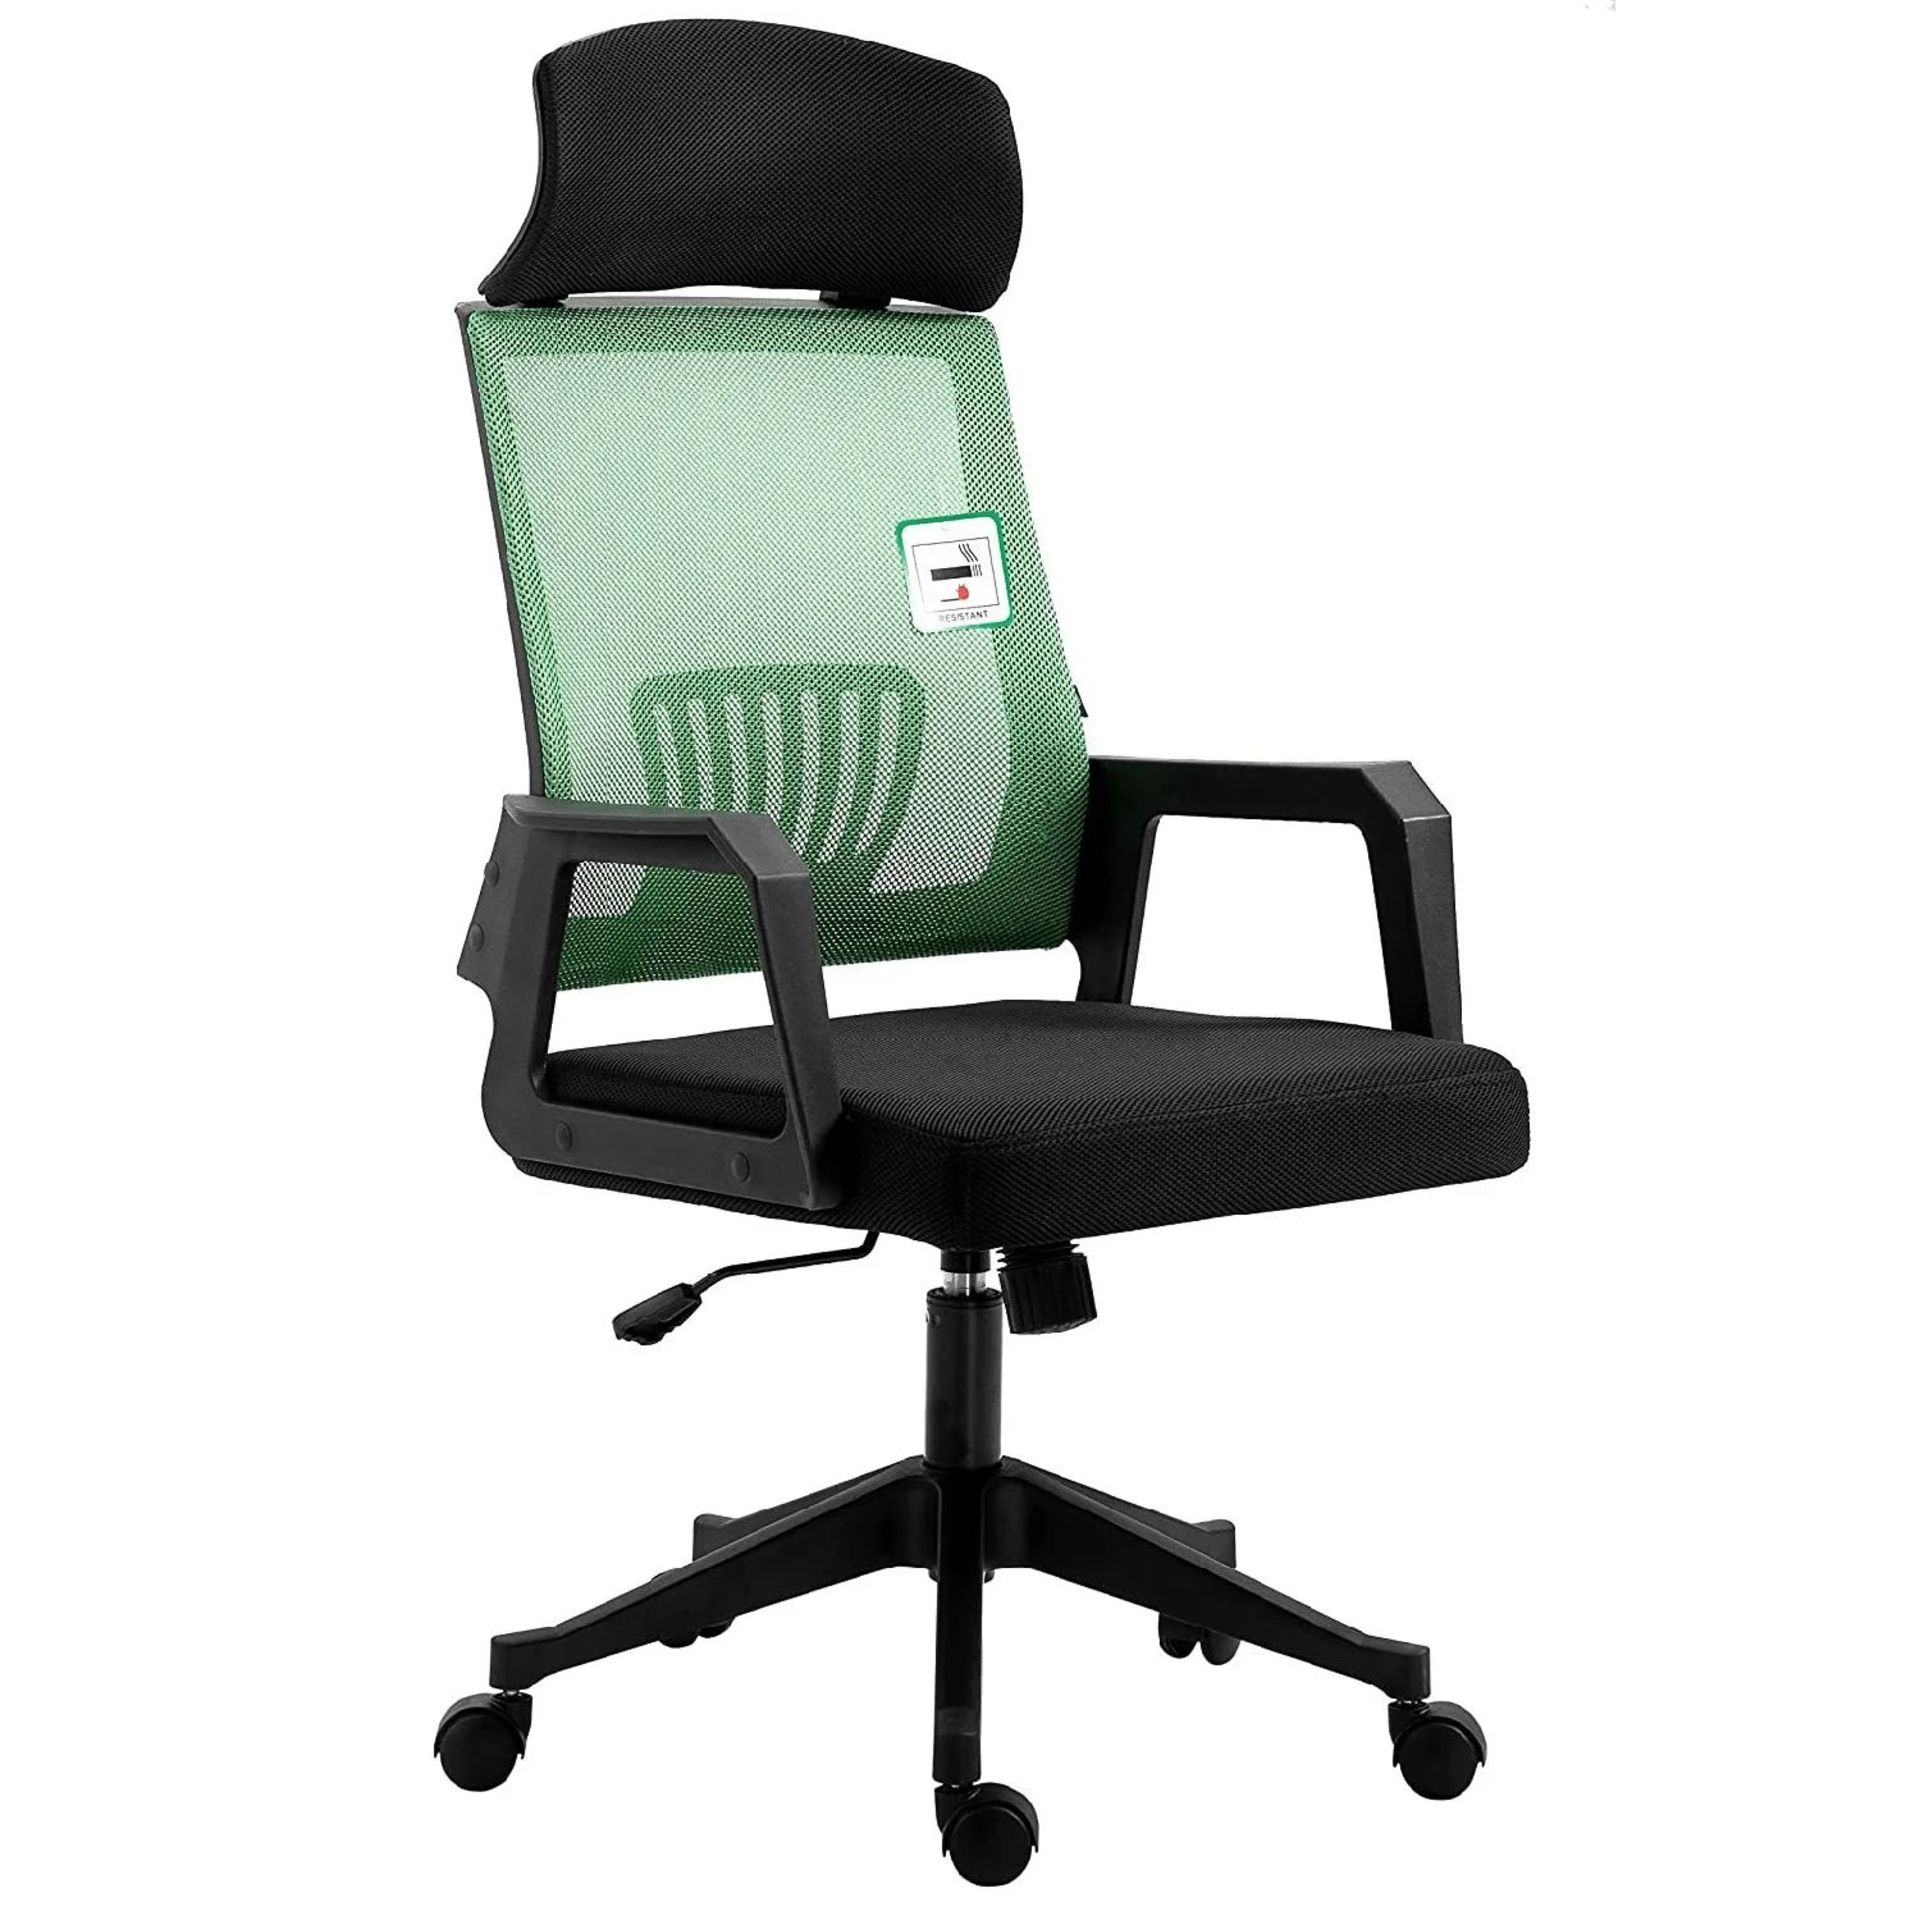 Beni Mesh Office Chair with Headrest in Green. - R14.